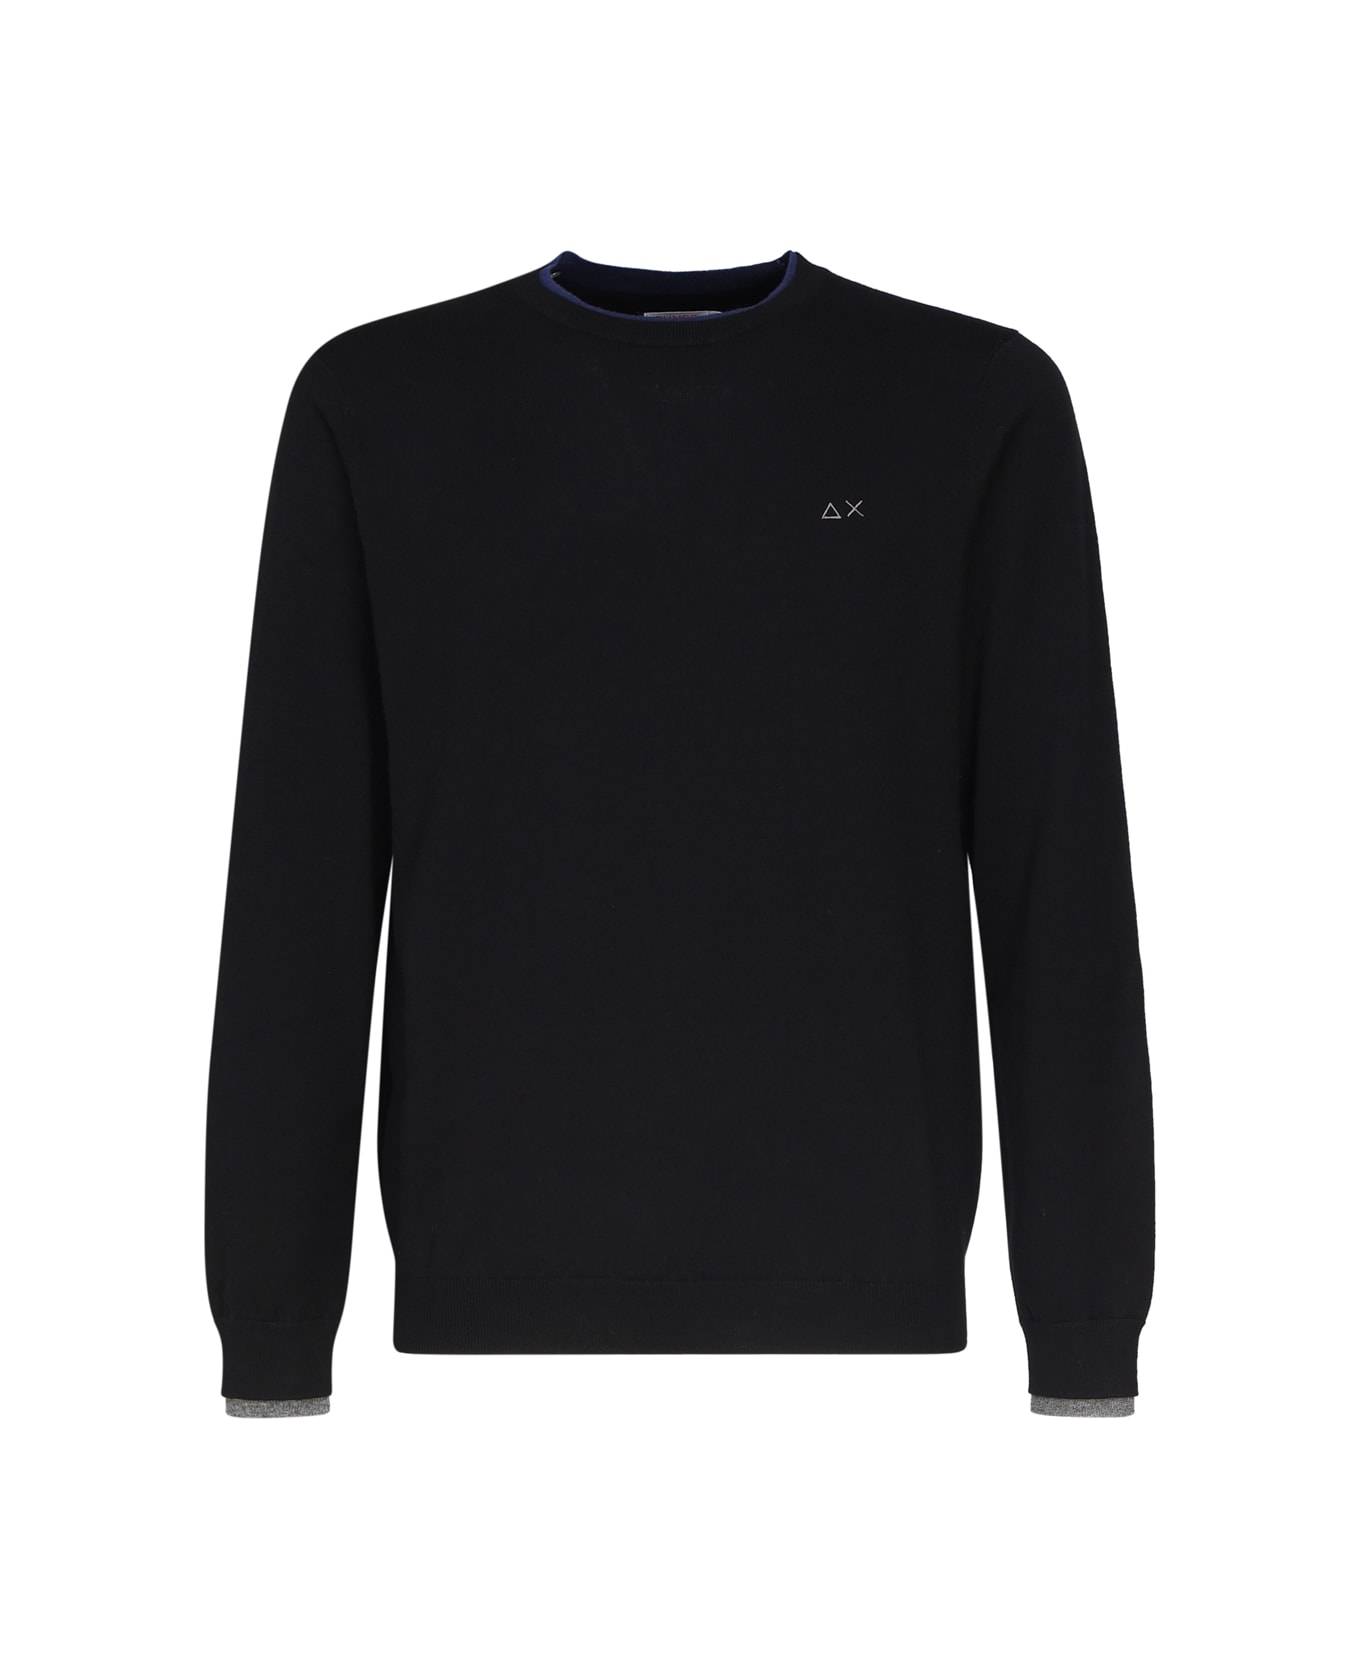 Sun 68 Sweater With Embroidered Logo - Black フリース